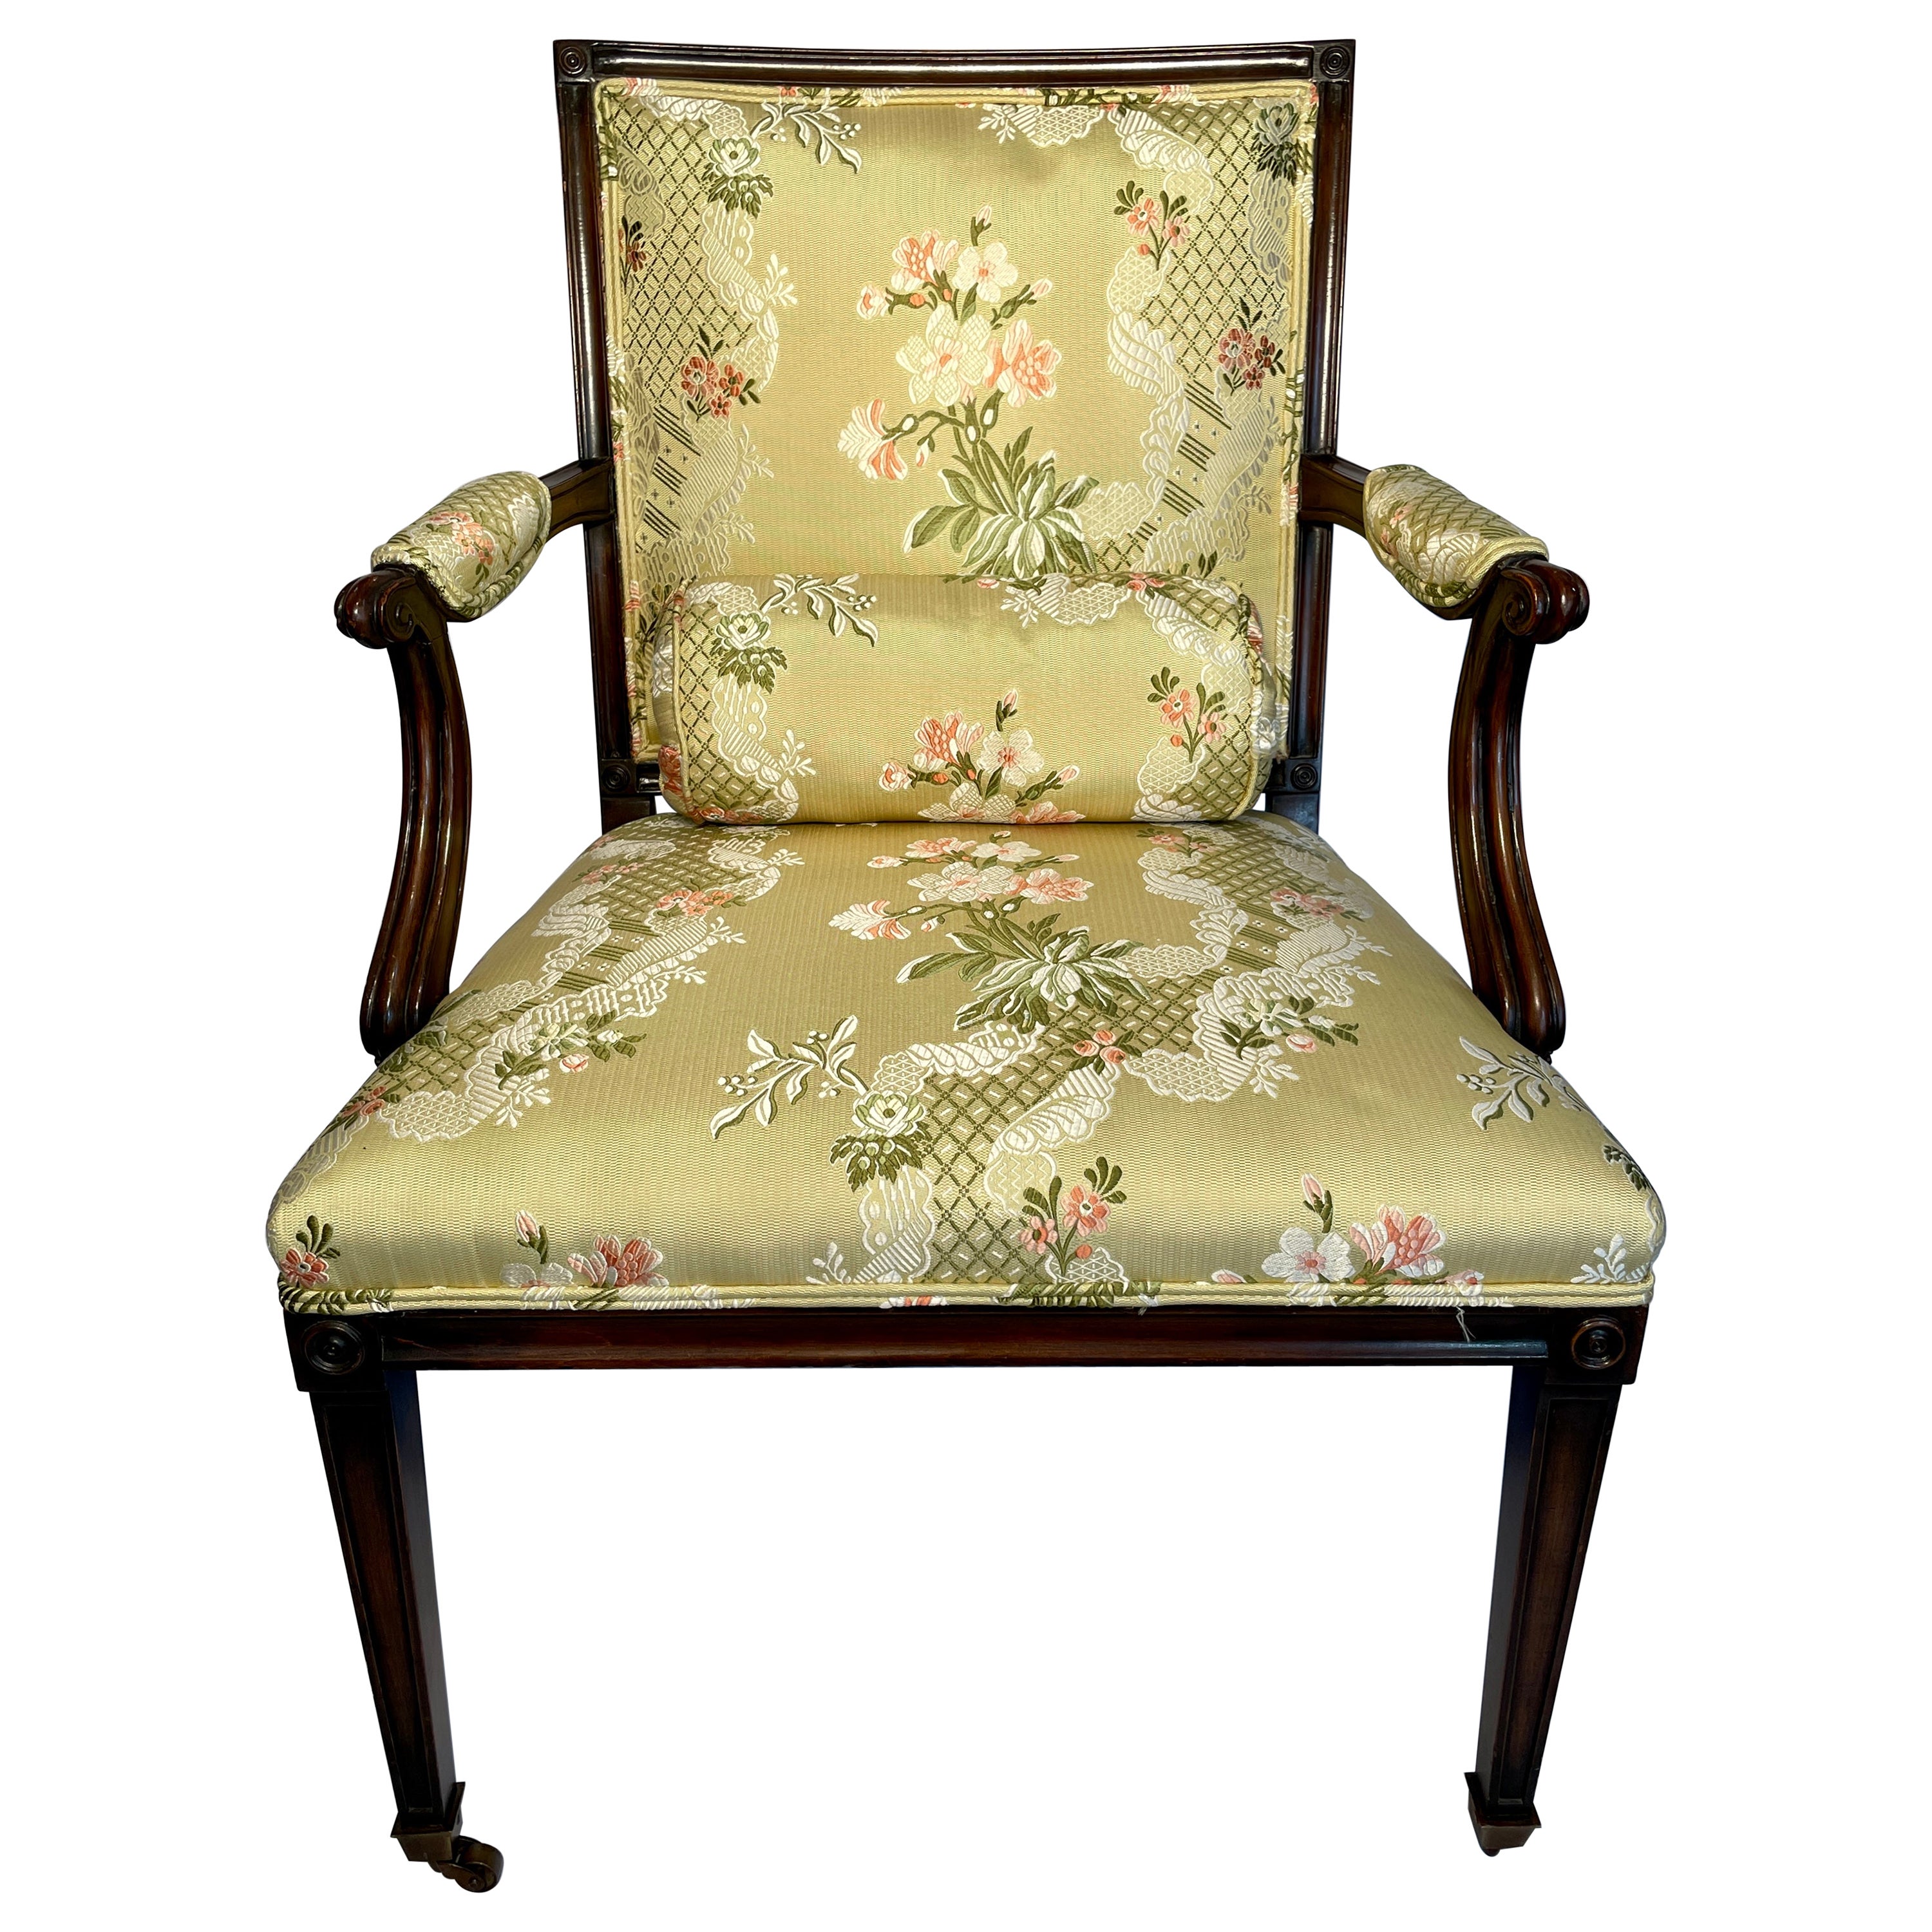 Antique English Mahogany Desk Chair with Scalamandre Fabric, Circa 1850-1860 For Sale